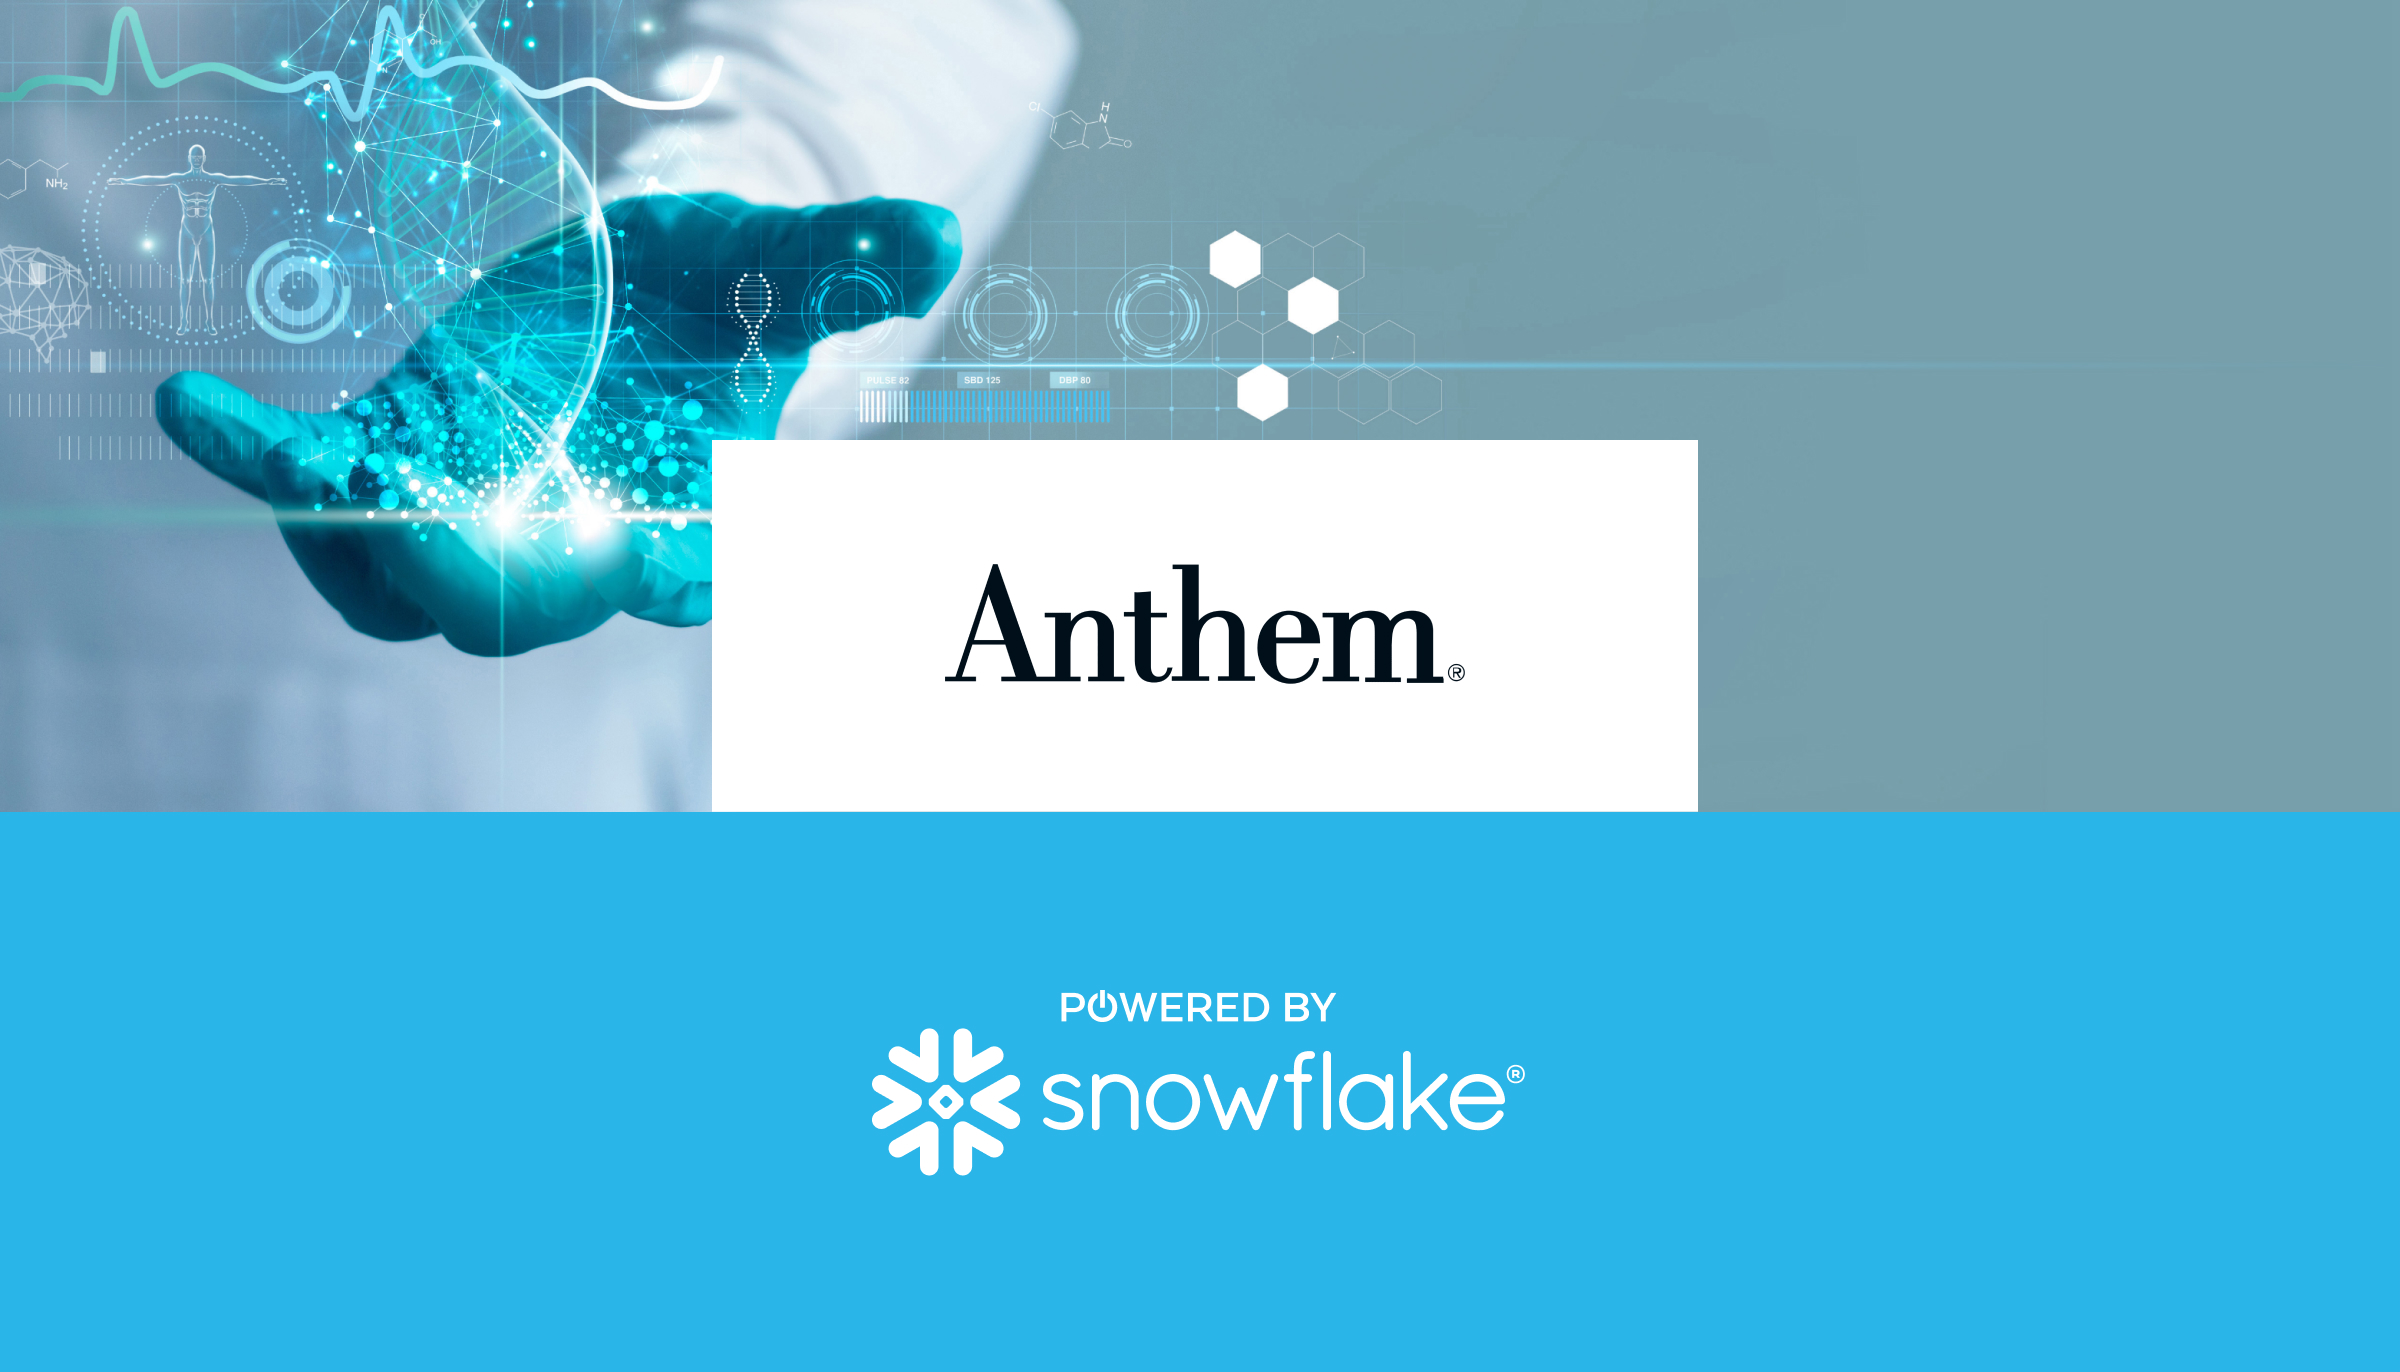 Anthem Delivers Holistic Patient Care with 360-Degree View Powered by Snowflake